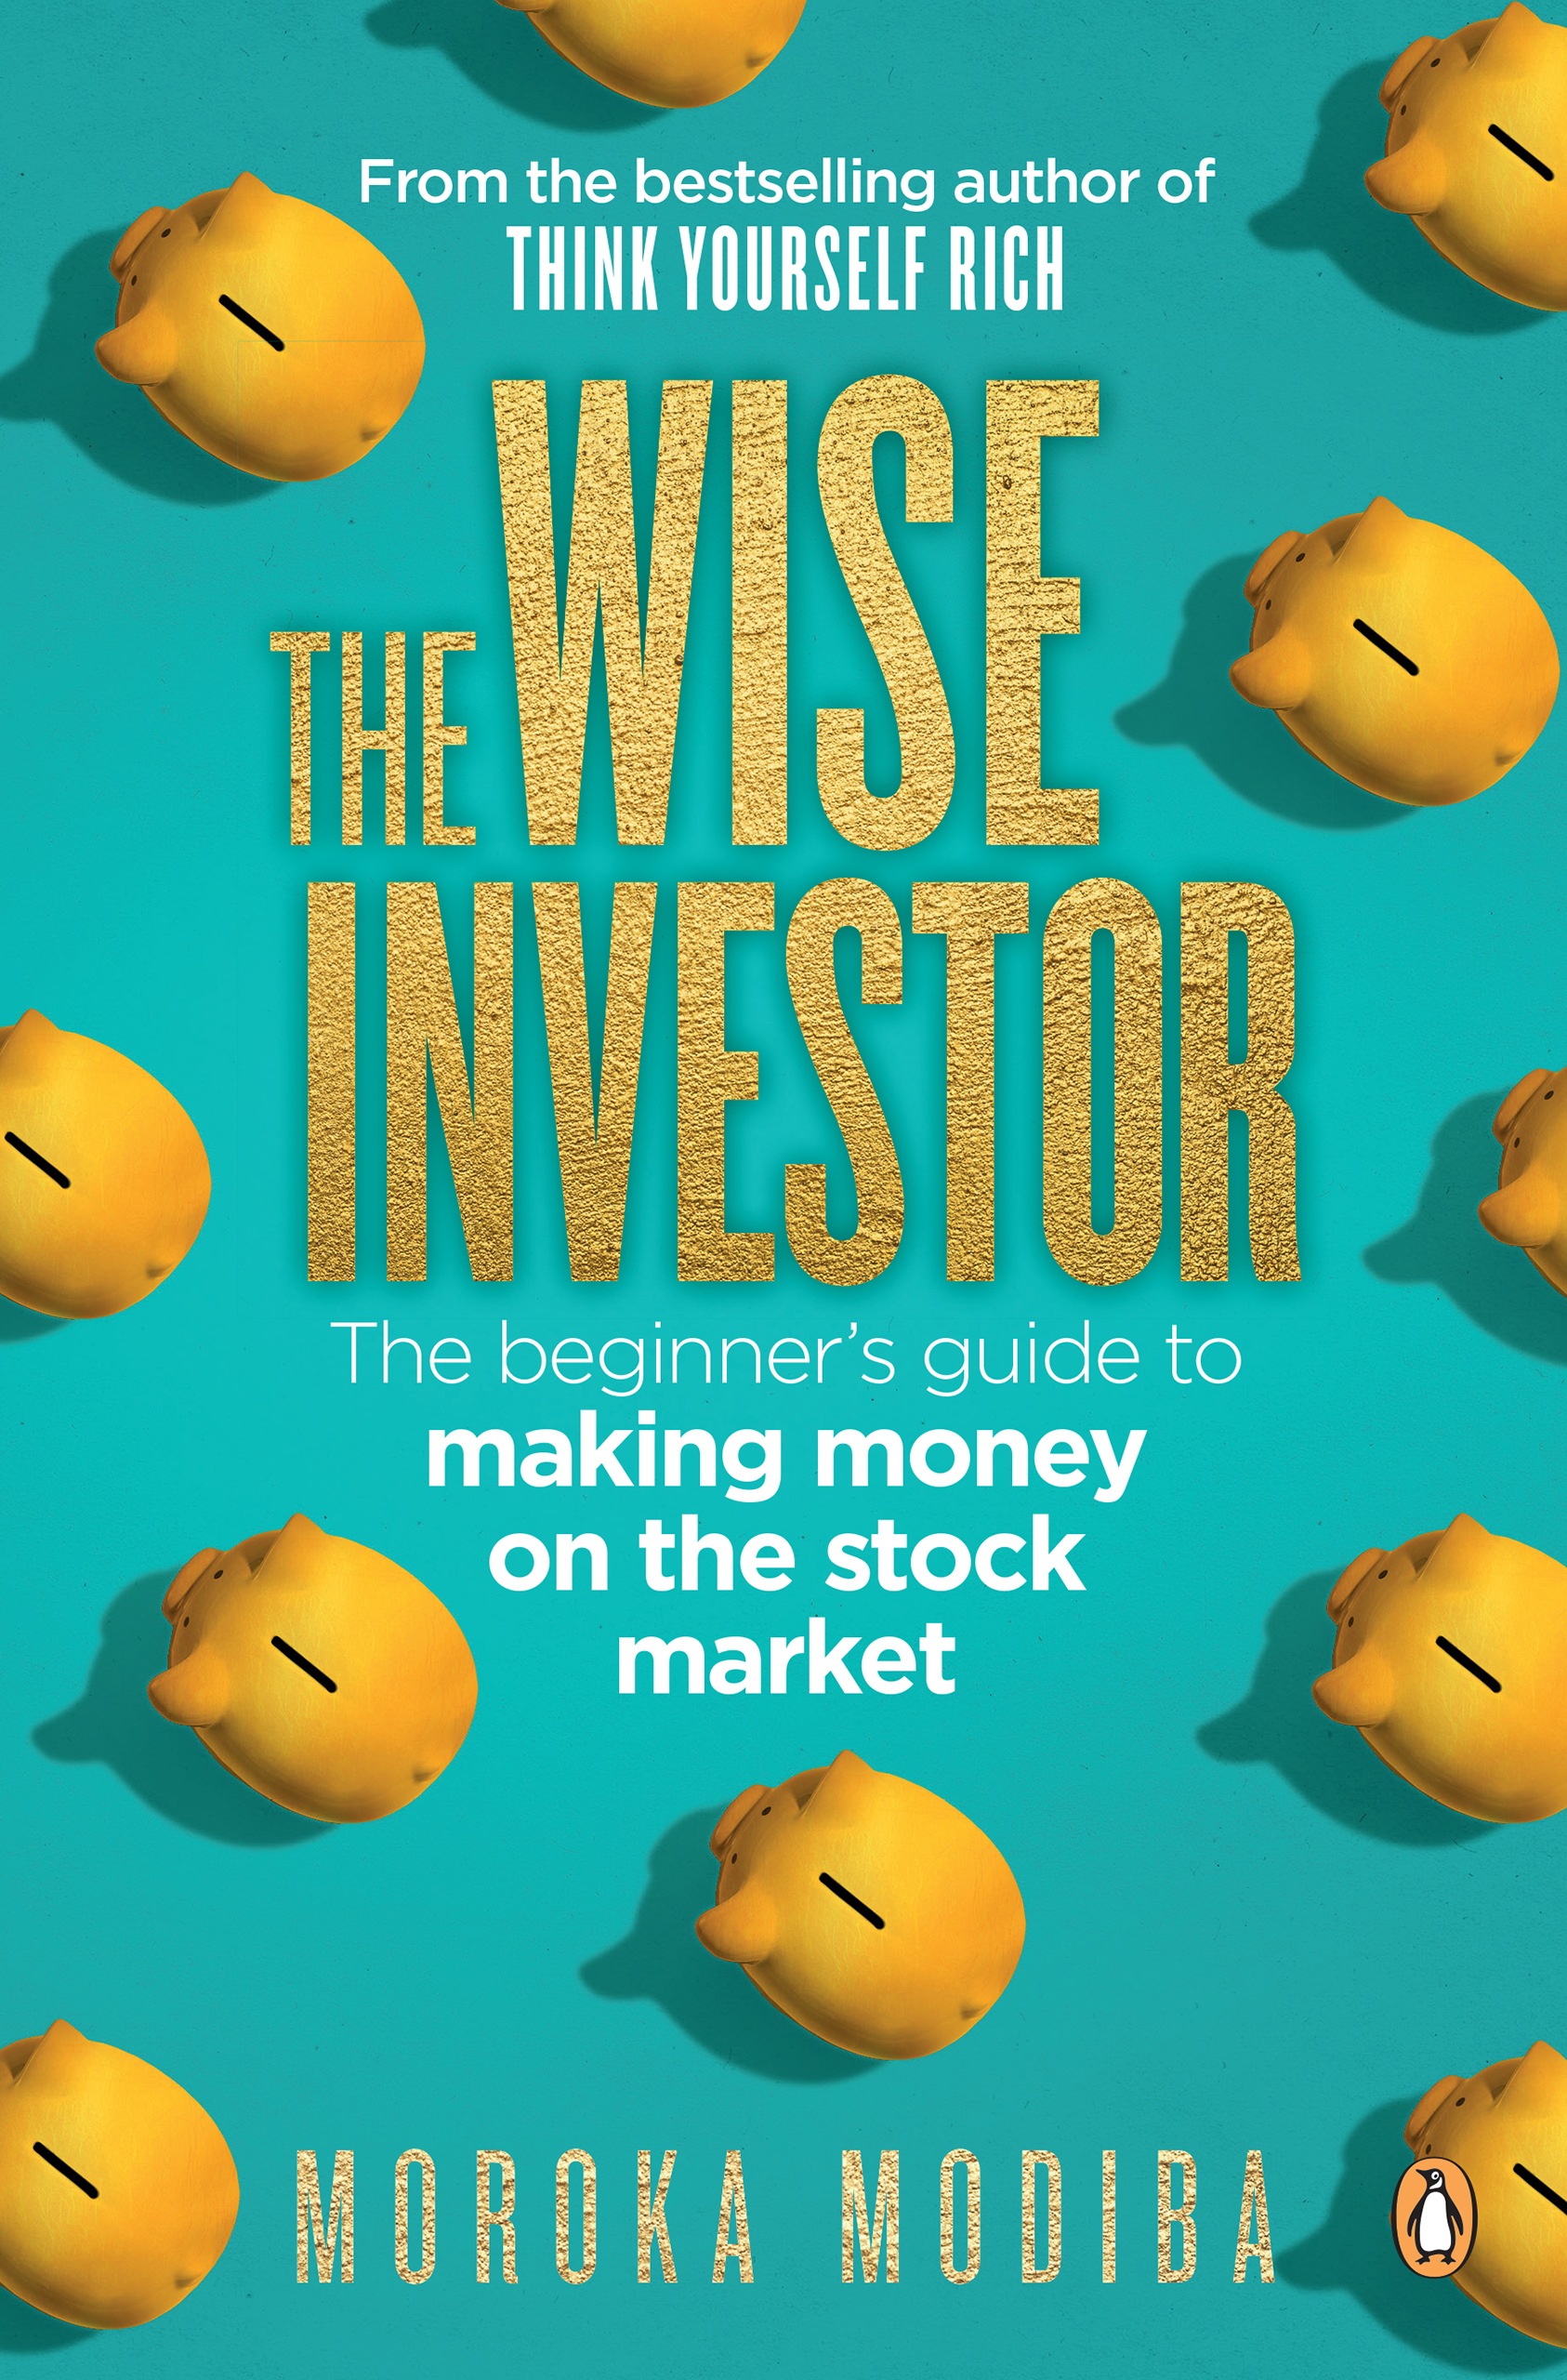 Wise Investor : The Beginner’s Guide to Making Money on the Stock Market